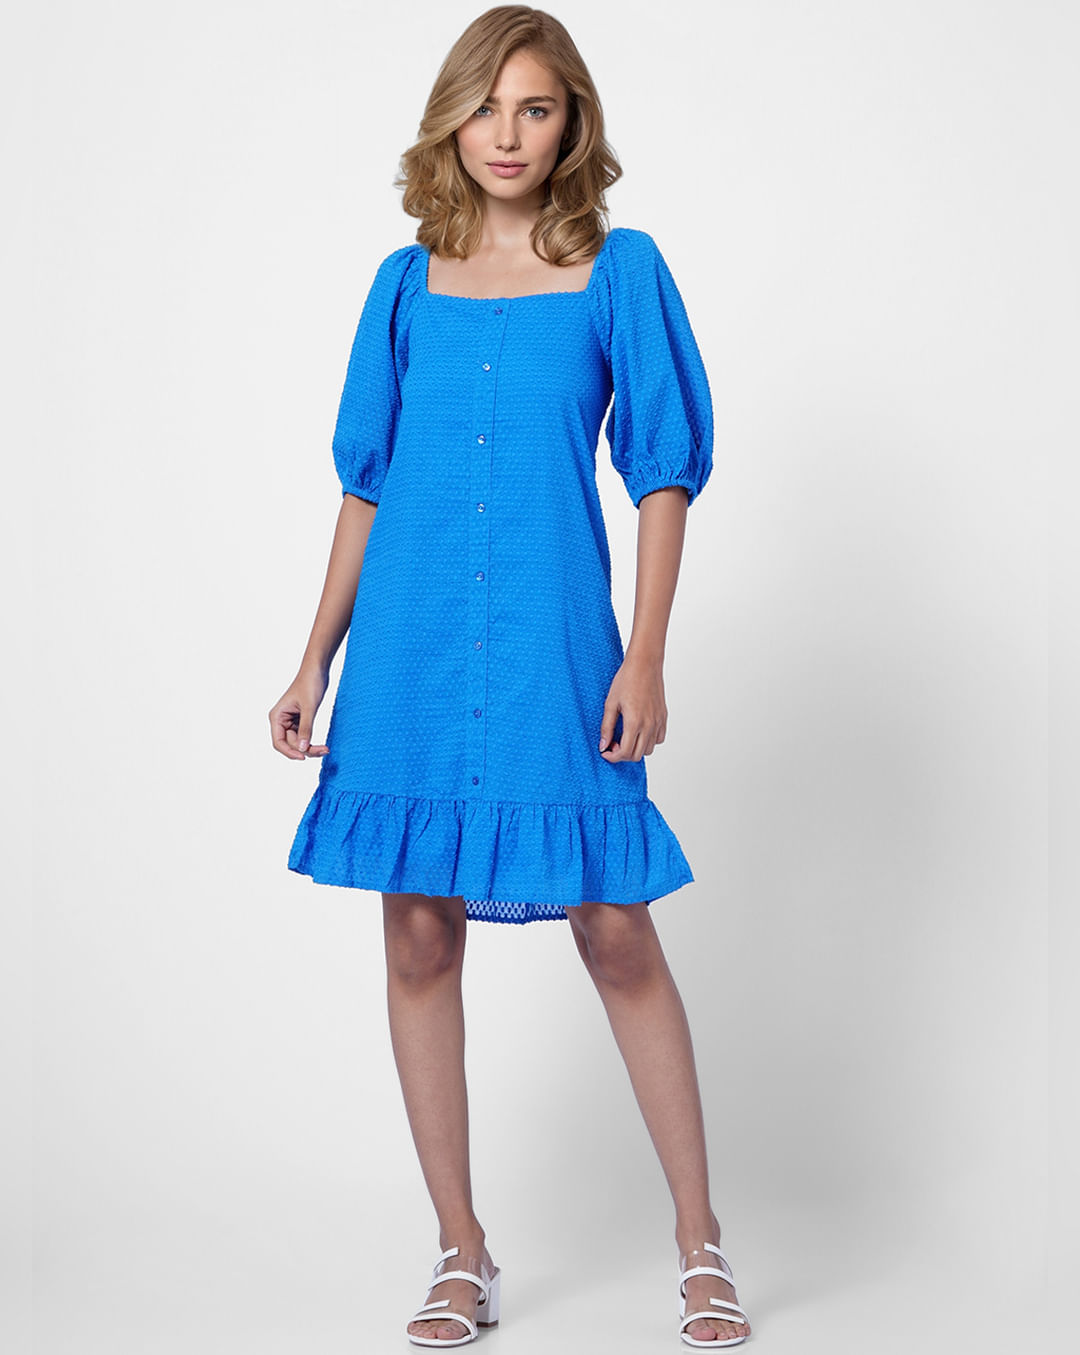 Buy Blue Textured Dress For Women Online India |